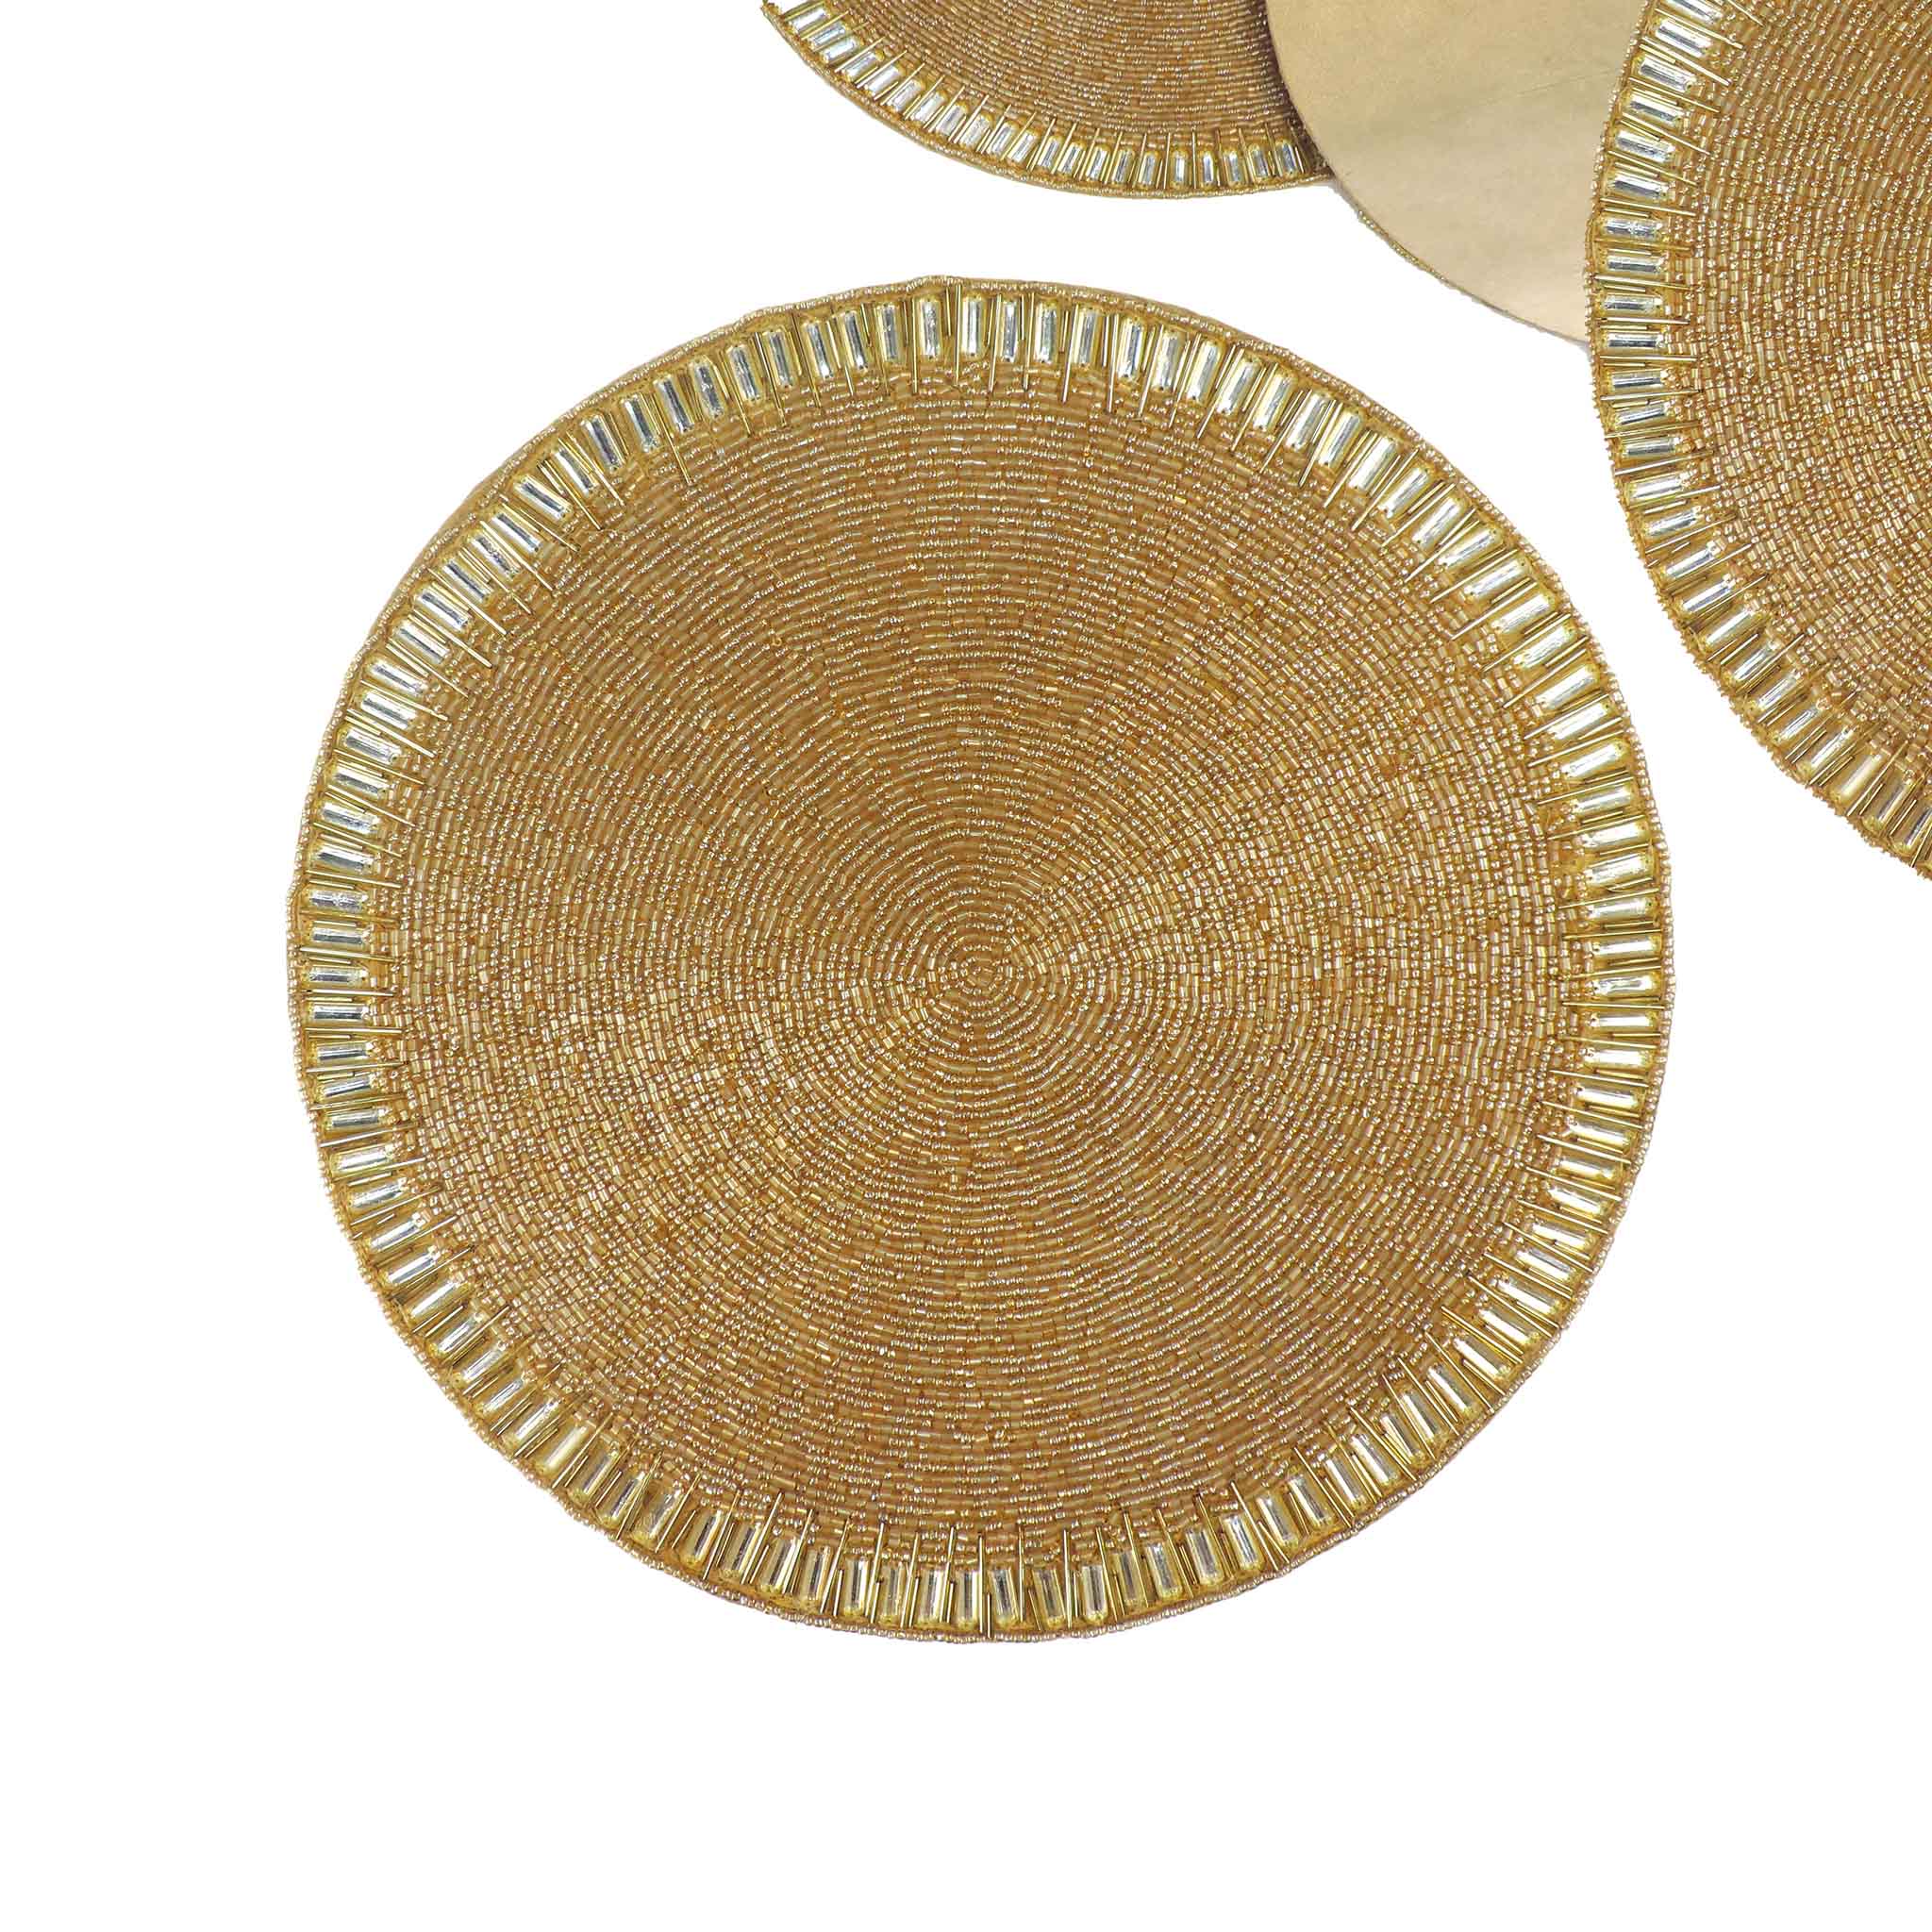 Glam Crystal Bead Embroidered Placemat in Gold, Set of 2/4